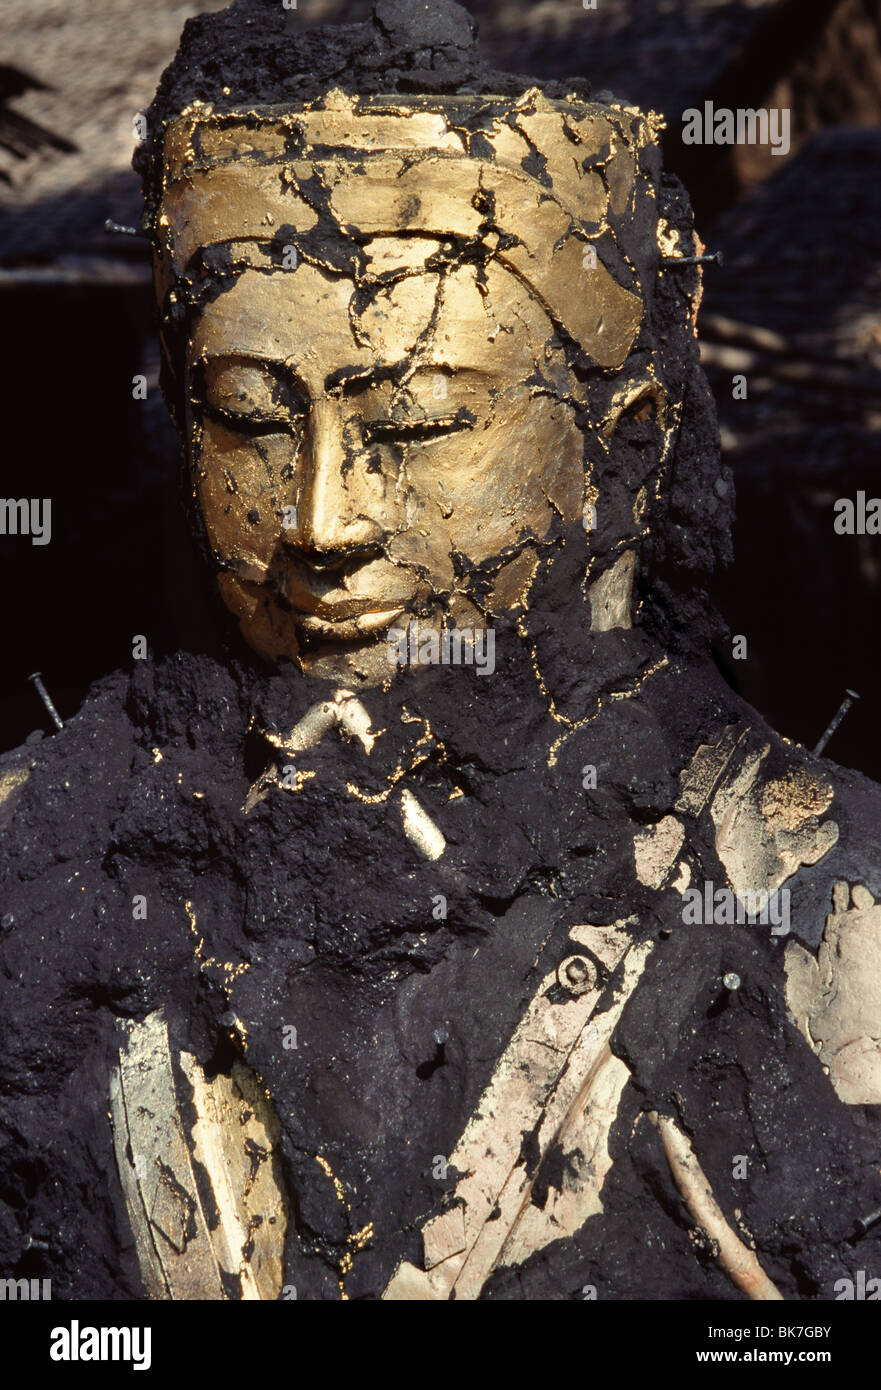 The face of Buddha emerging from the ashes, bronze casting, Mandalay, Myanmar (Burma), Asia Stock Photo